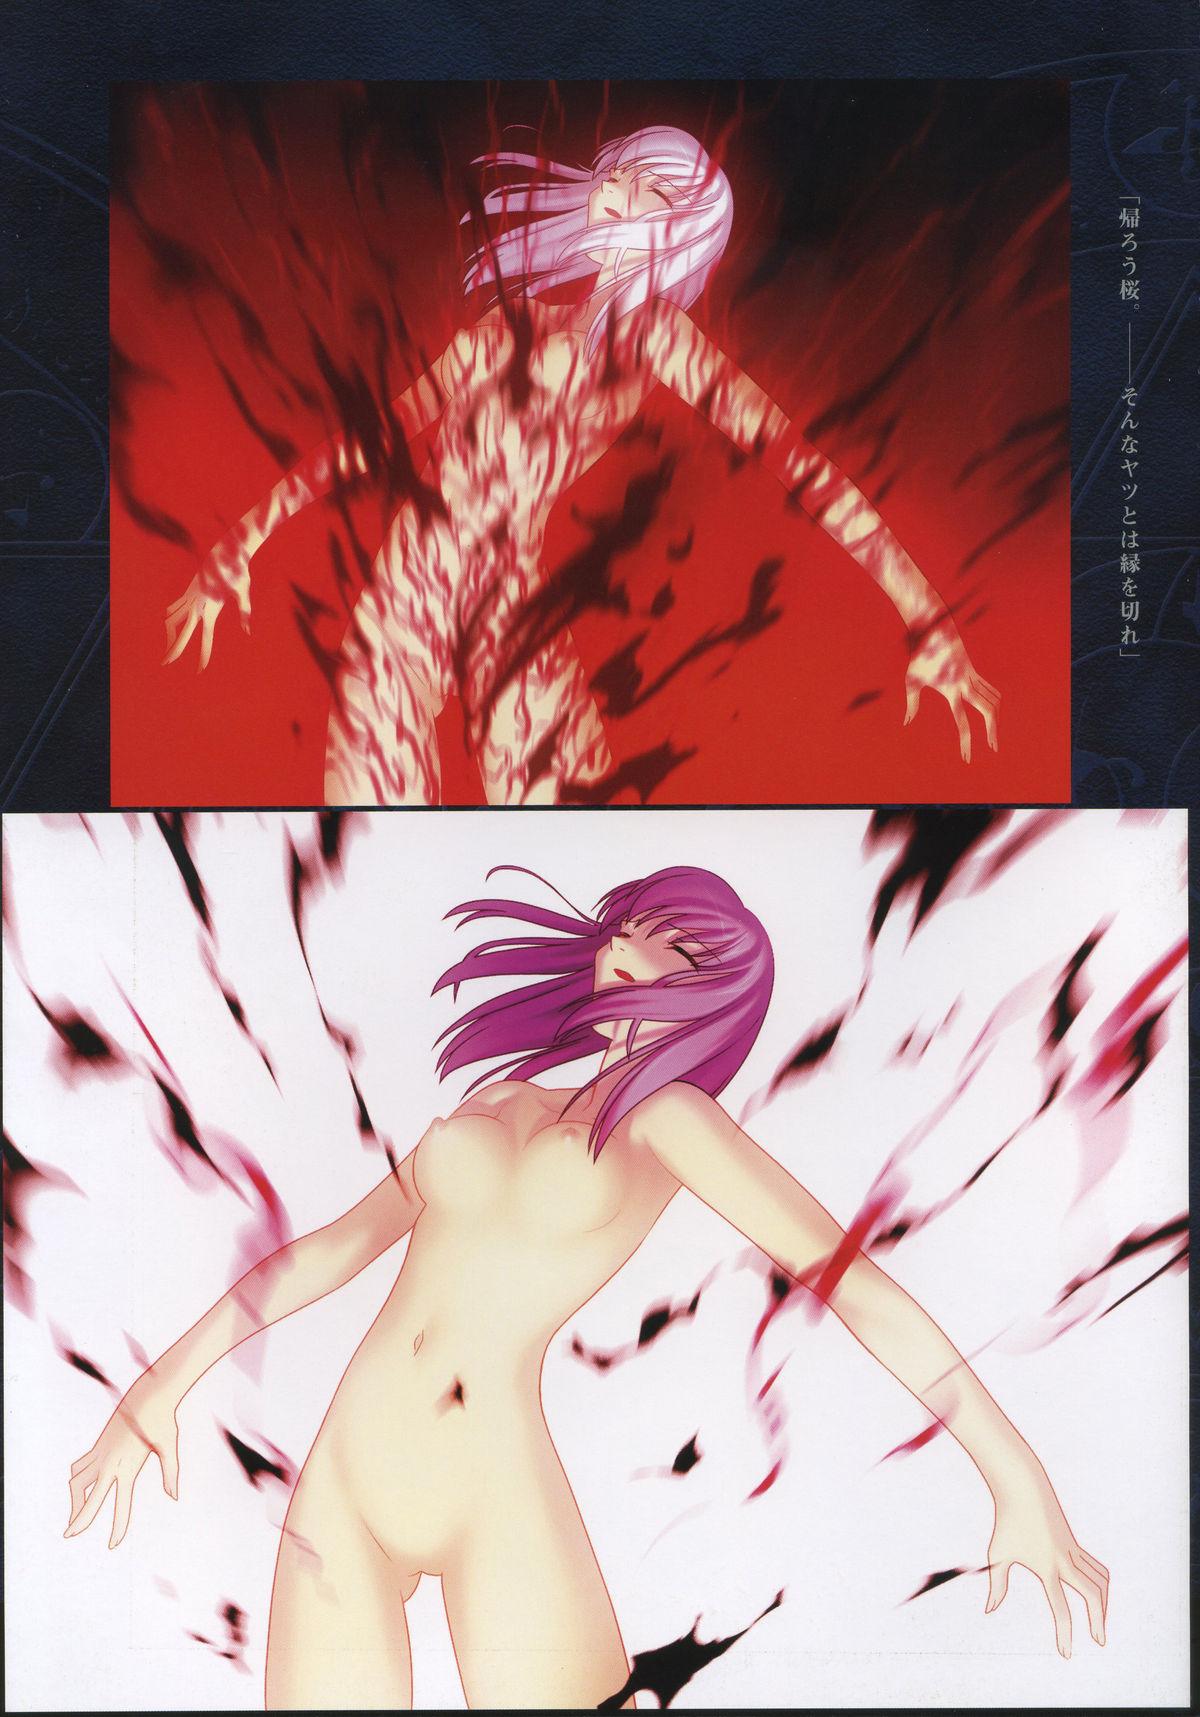 Fate/complete material I - Art material. 108